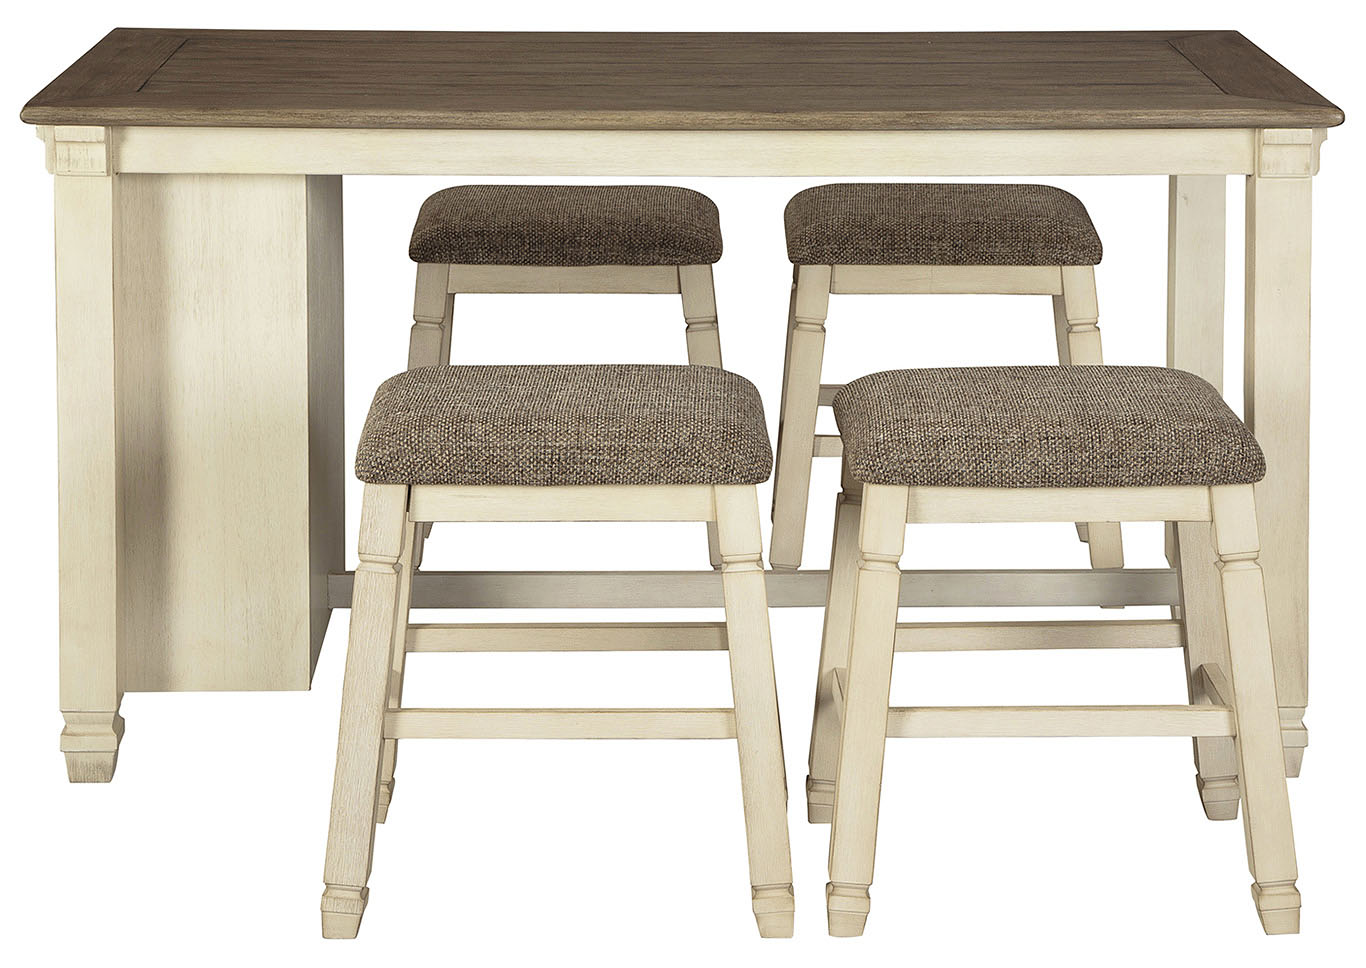 Bar Stools Ashley Furniture Home, Marsilona Counter Height Dining Room Table